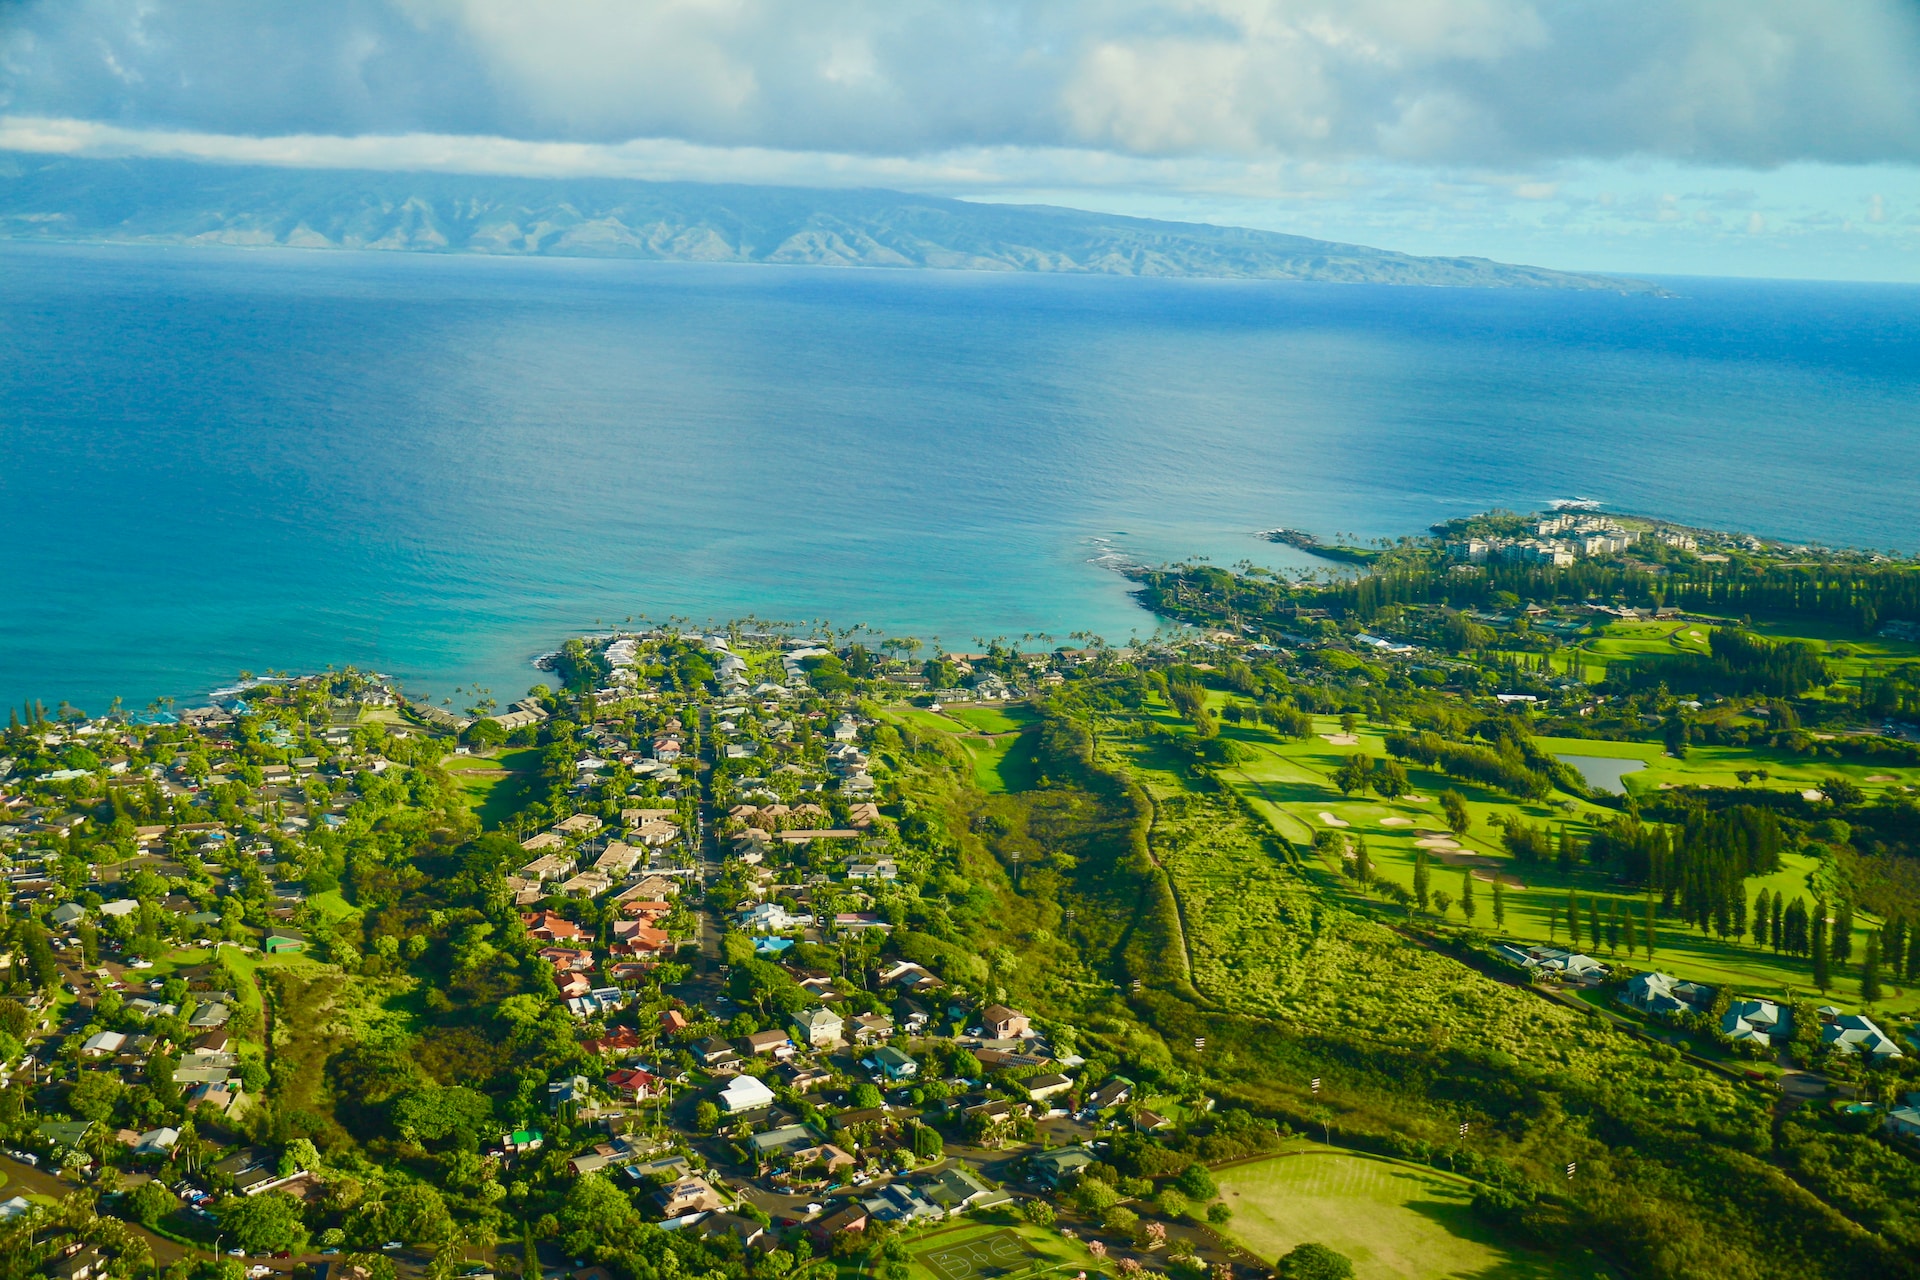 Top 6 ways to have fun in maui